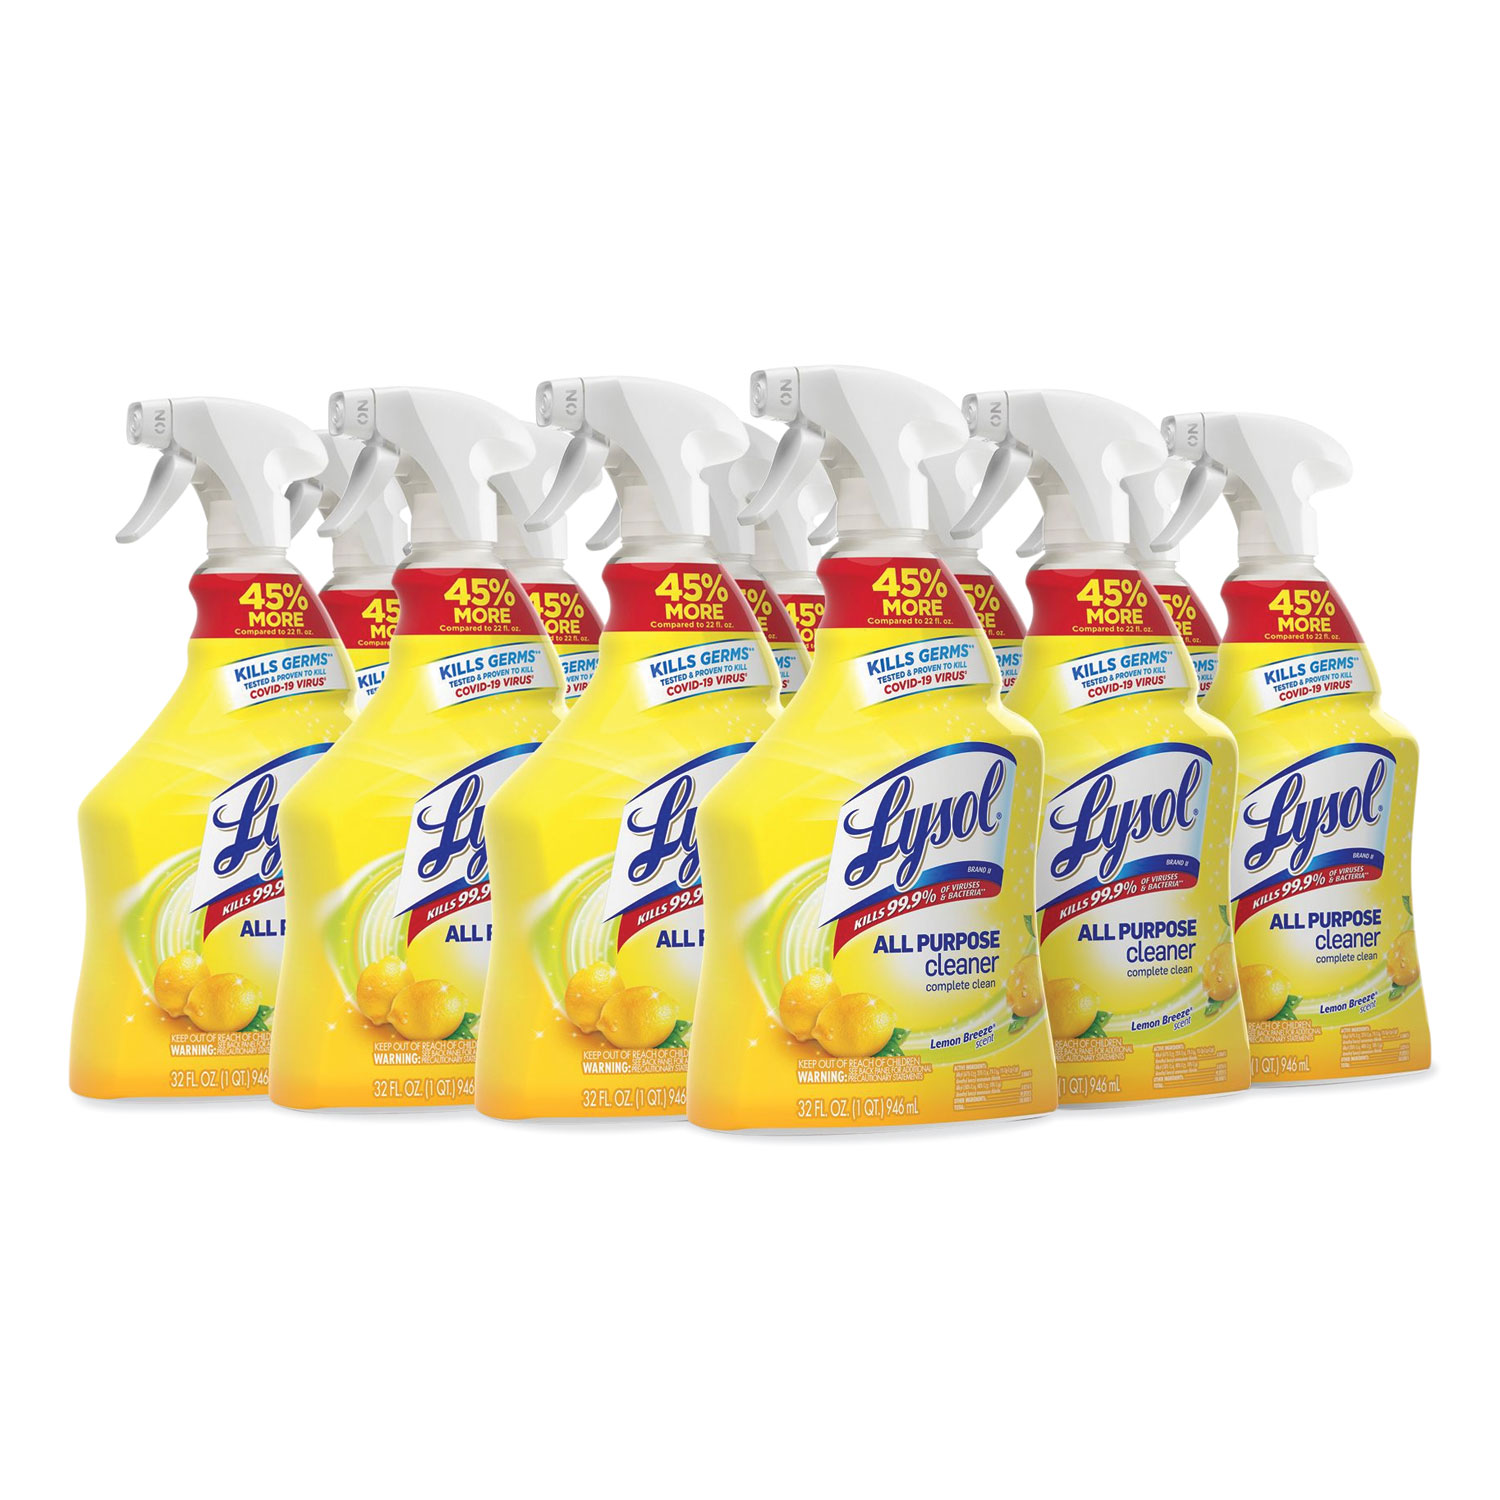 3M Scotch Brite Glass And Surface Cleaner Spray 32 Oz Bottle